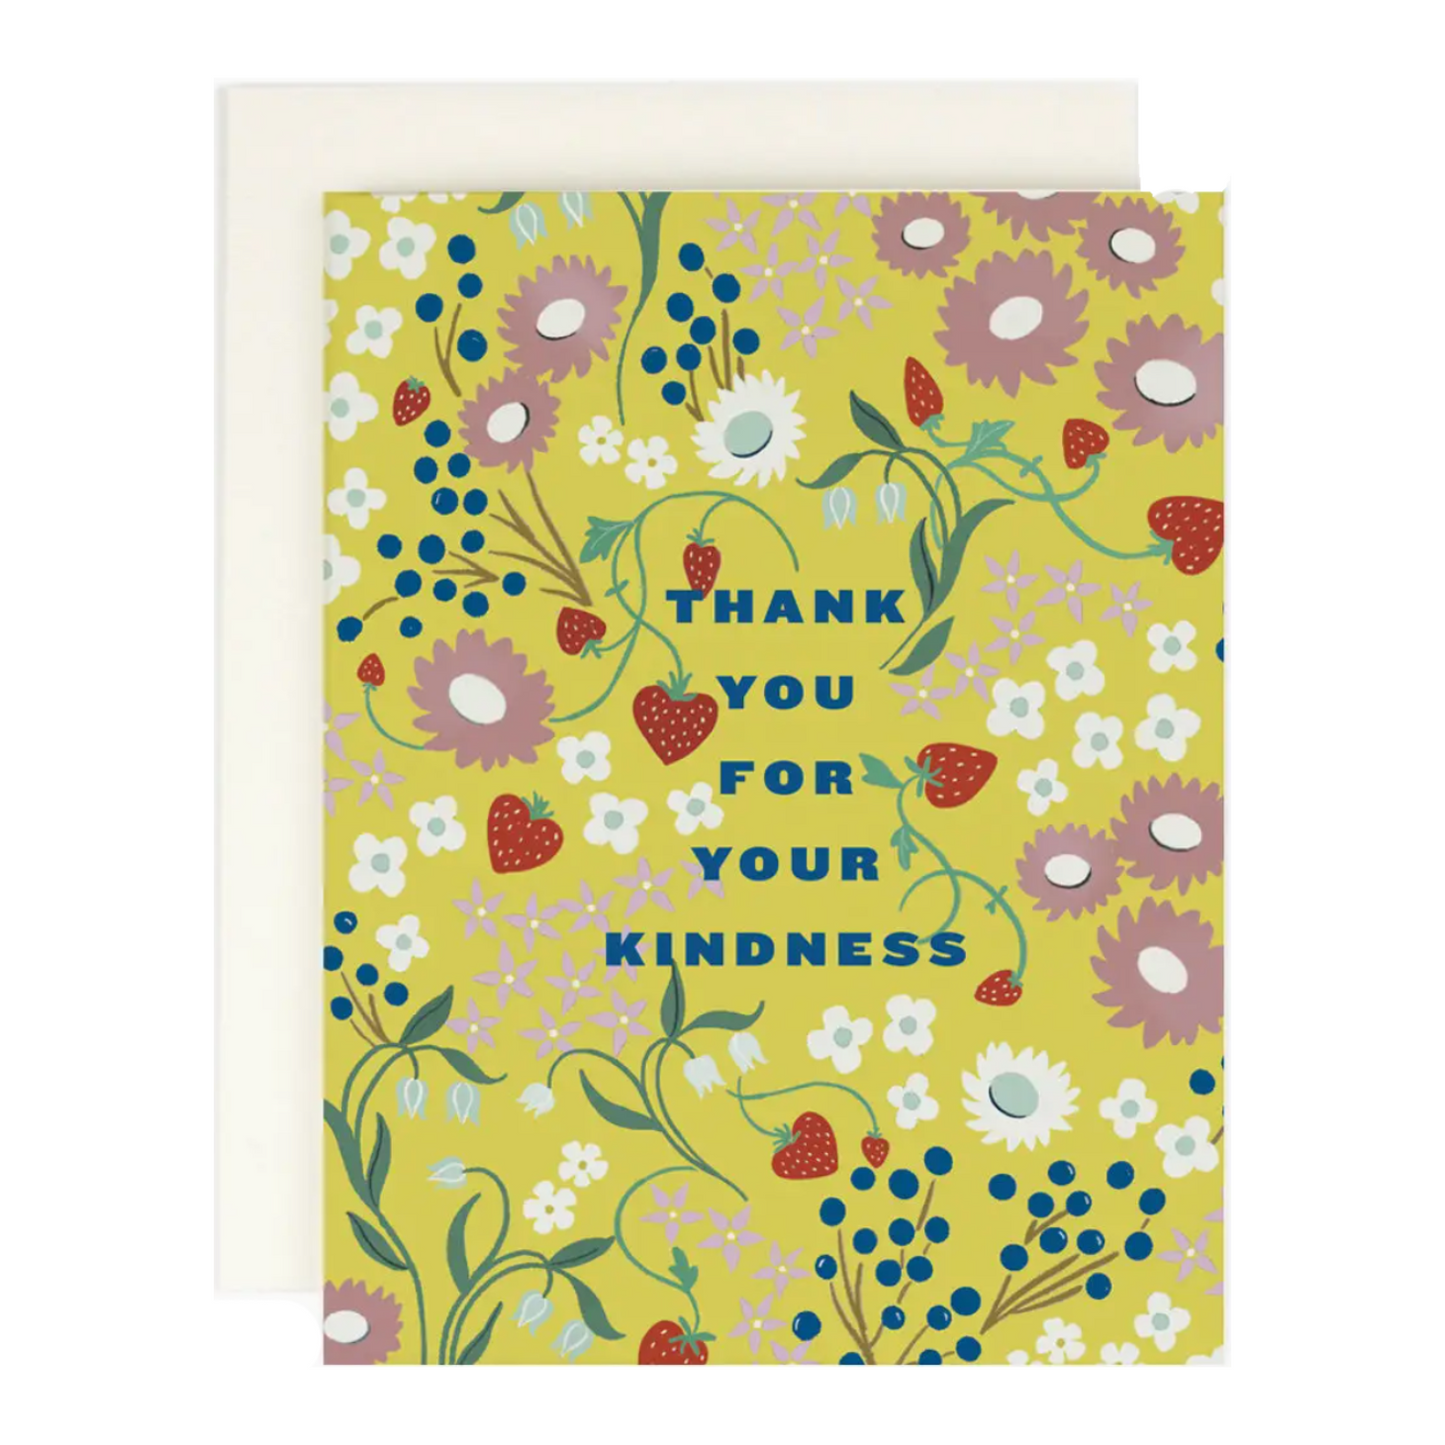 Your Kindness Card by Amy Heitman